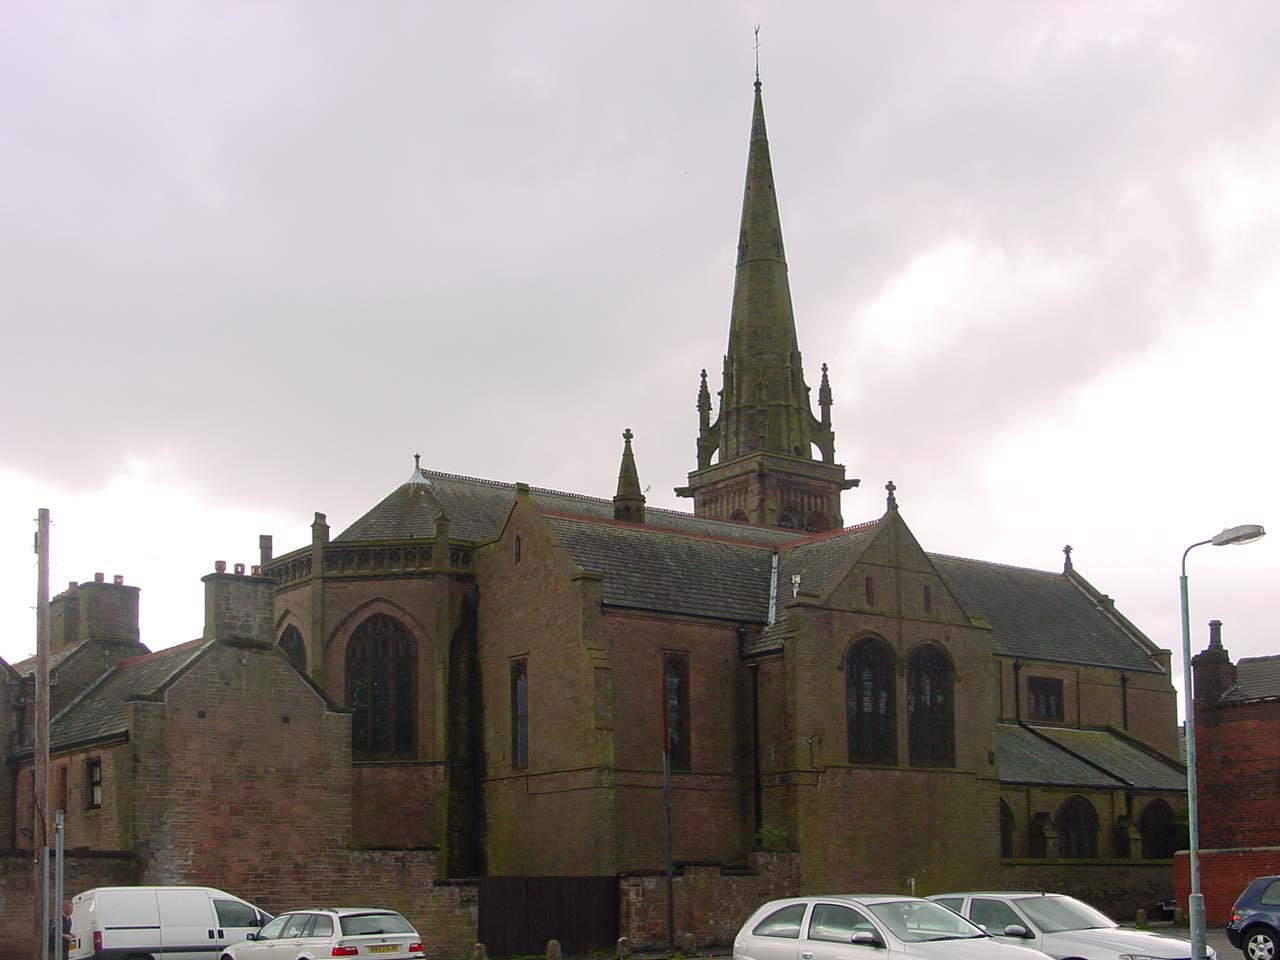 The Iron Church from behind